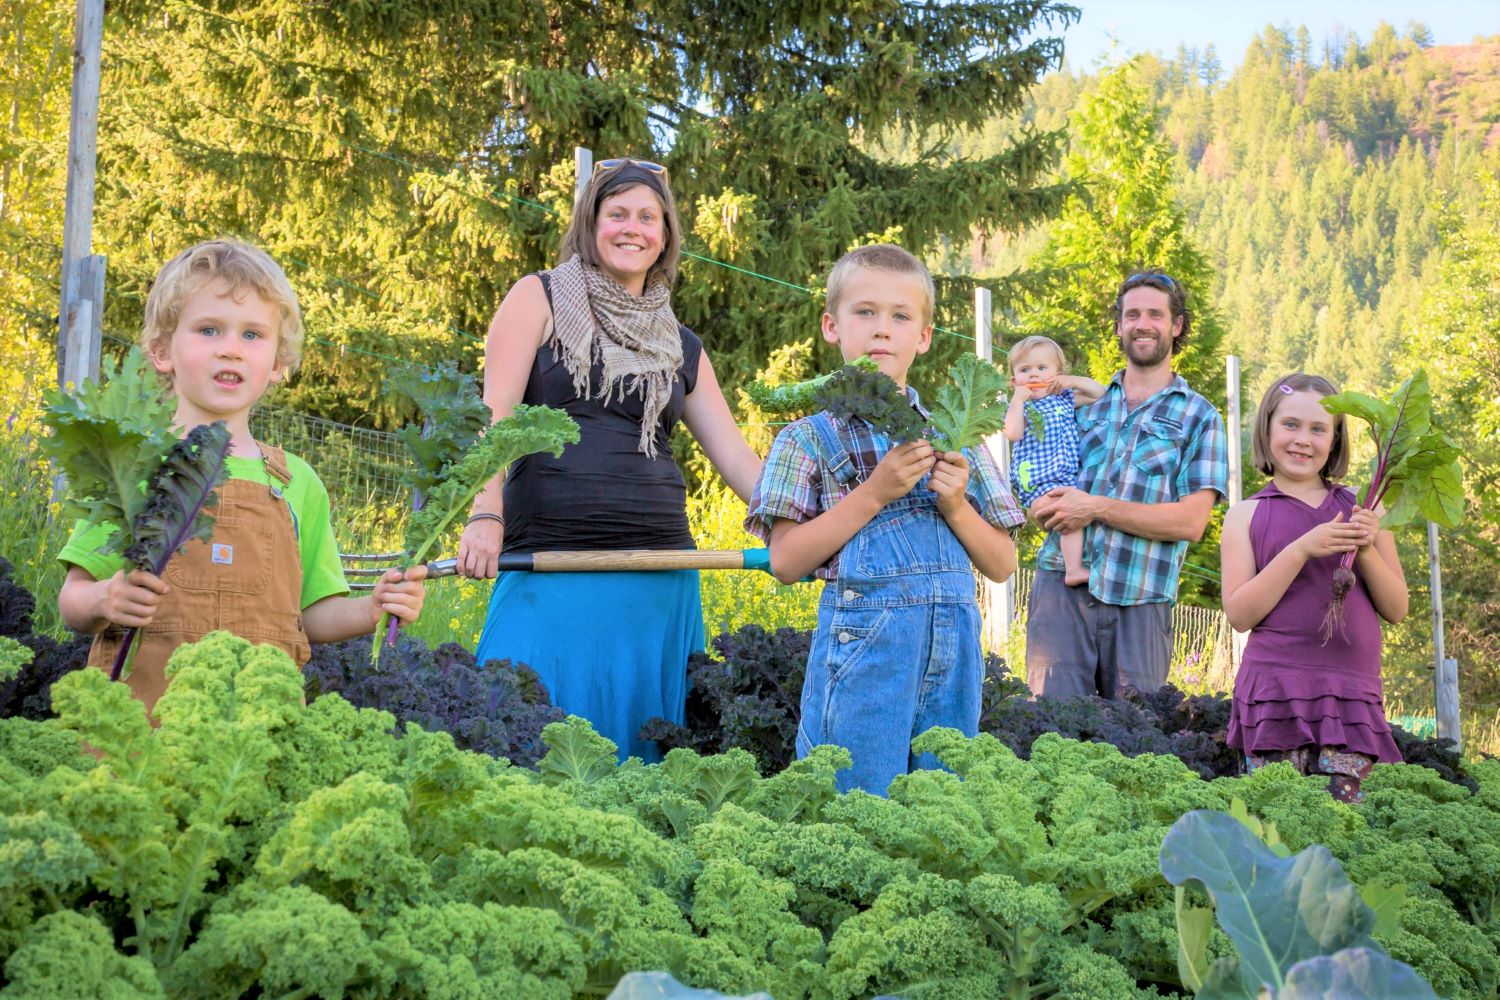 Happy Hills Farm in Rossland receives boost from FedEx grant